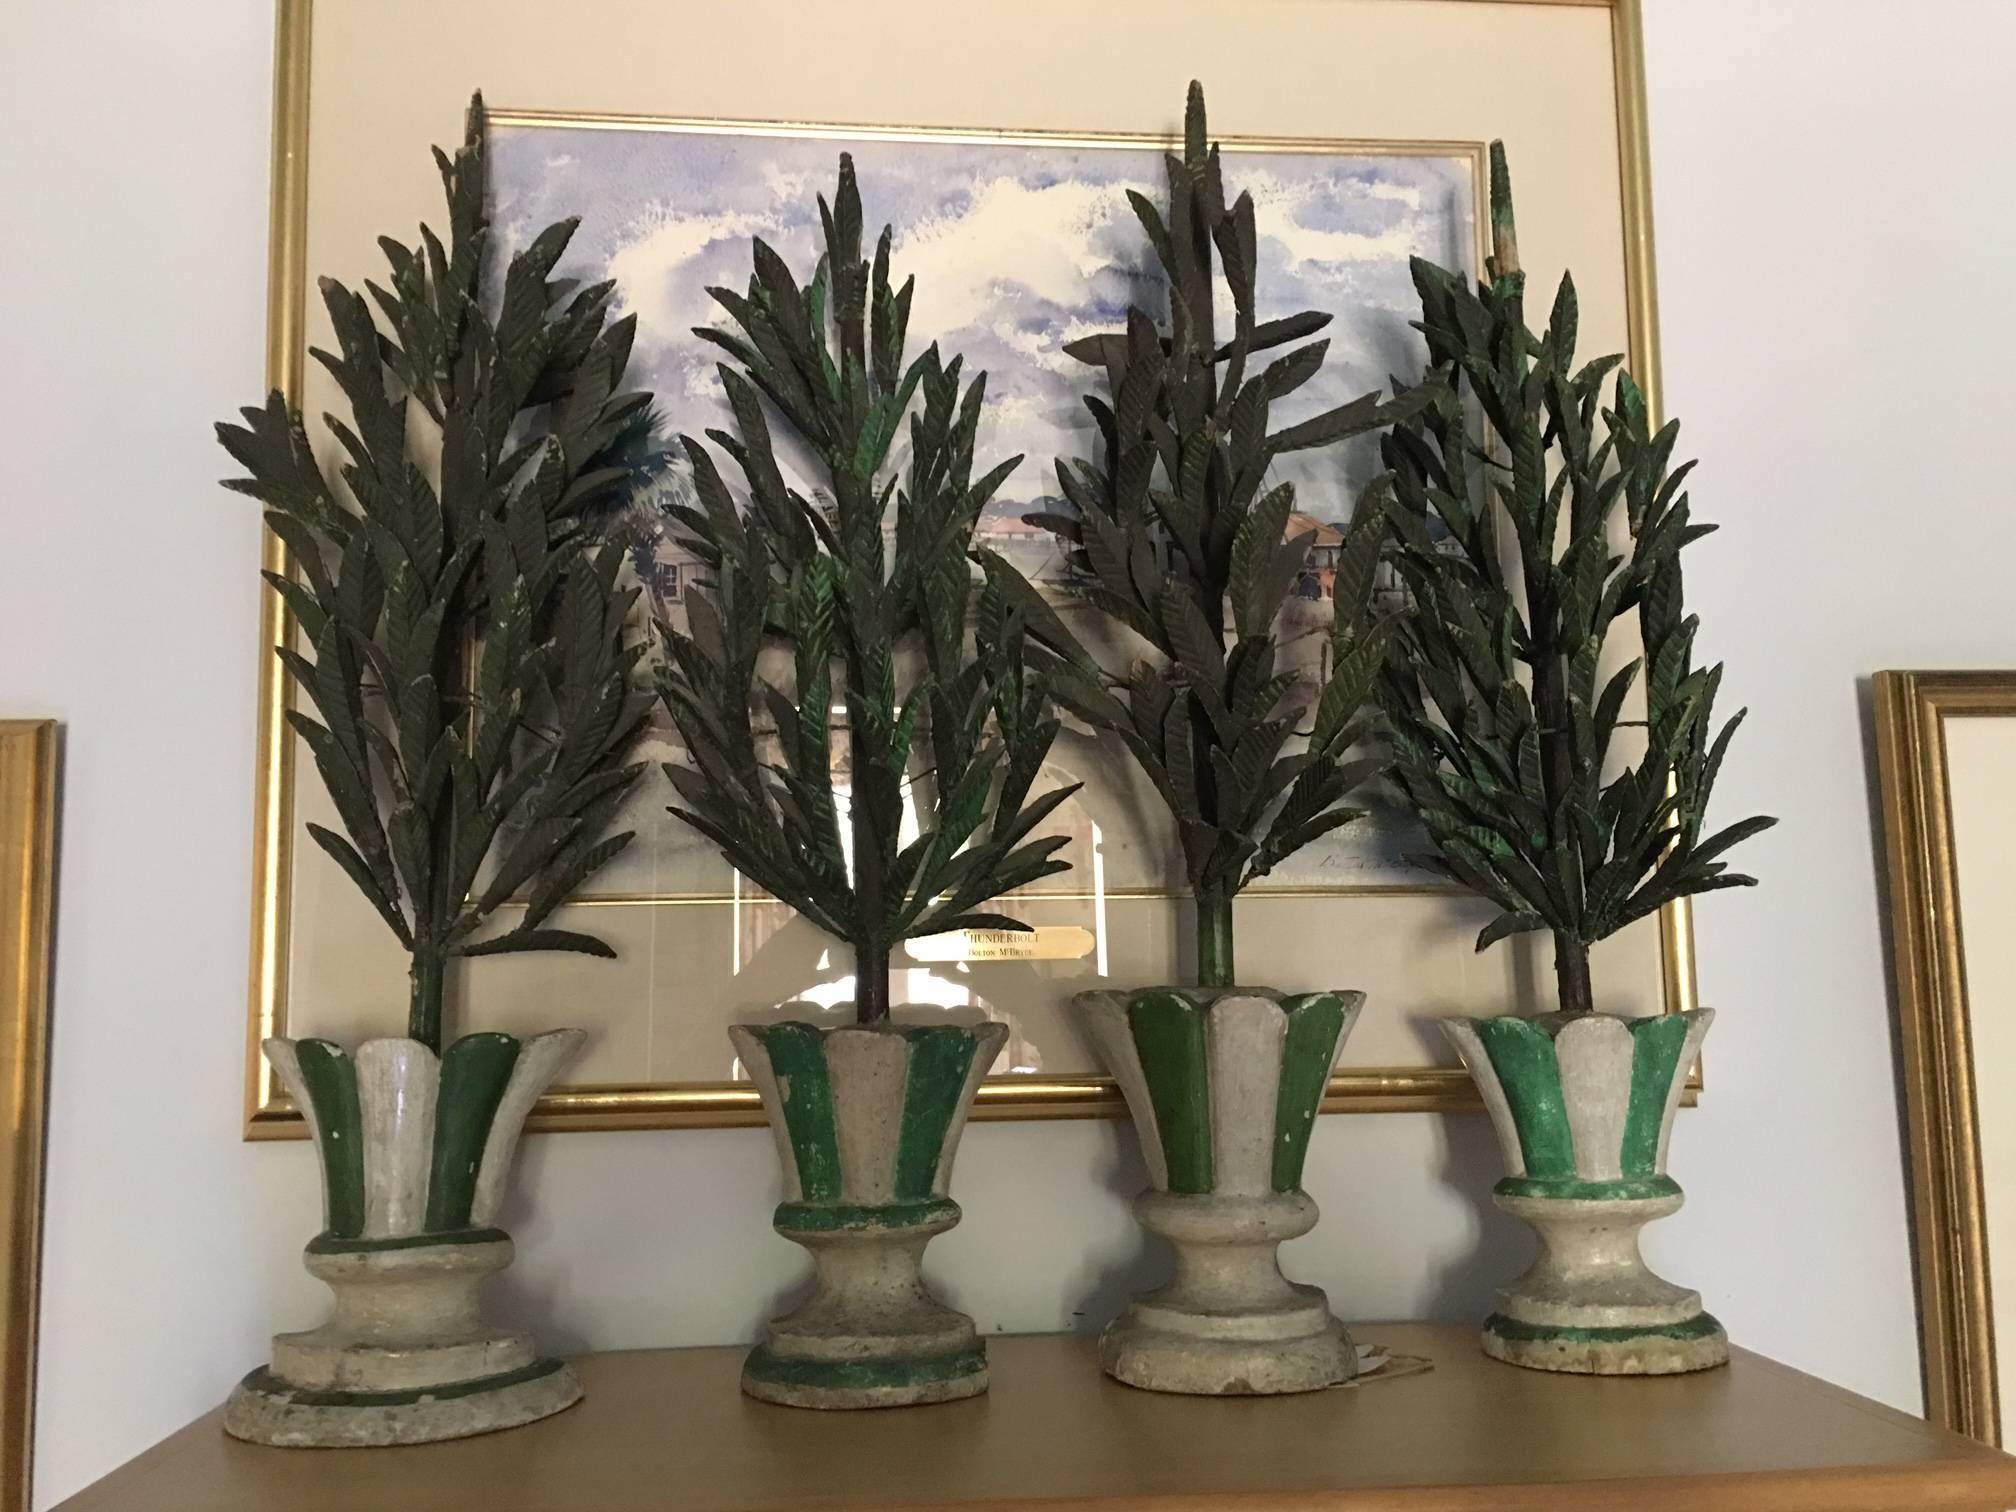 Four charming 19th century Italian wood-carvings of trees in pots. Painted cream and green. Charming, subtle and tasteful, to hang on the wall in a garden room or to Stand alone. The items are three-dimensional with a depth of 9